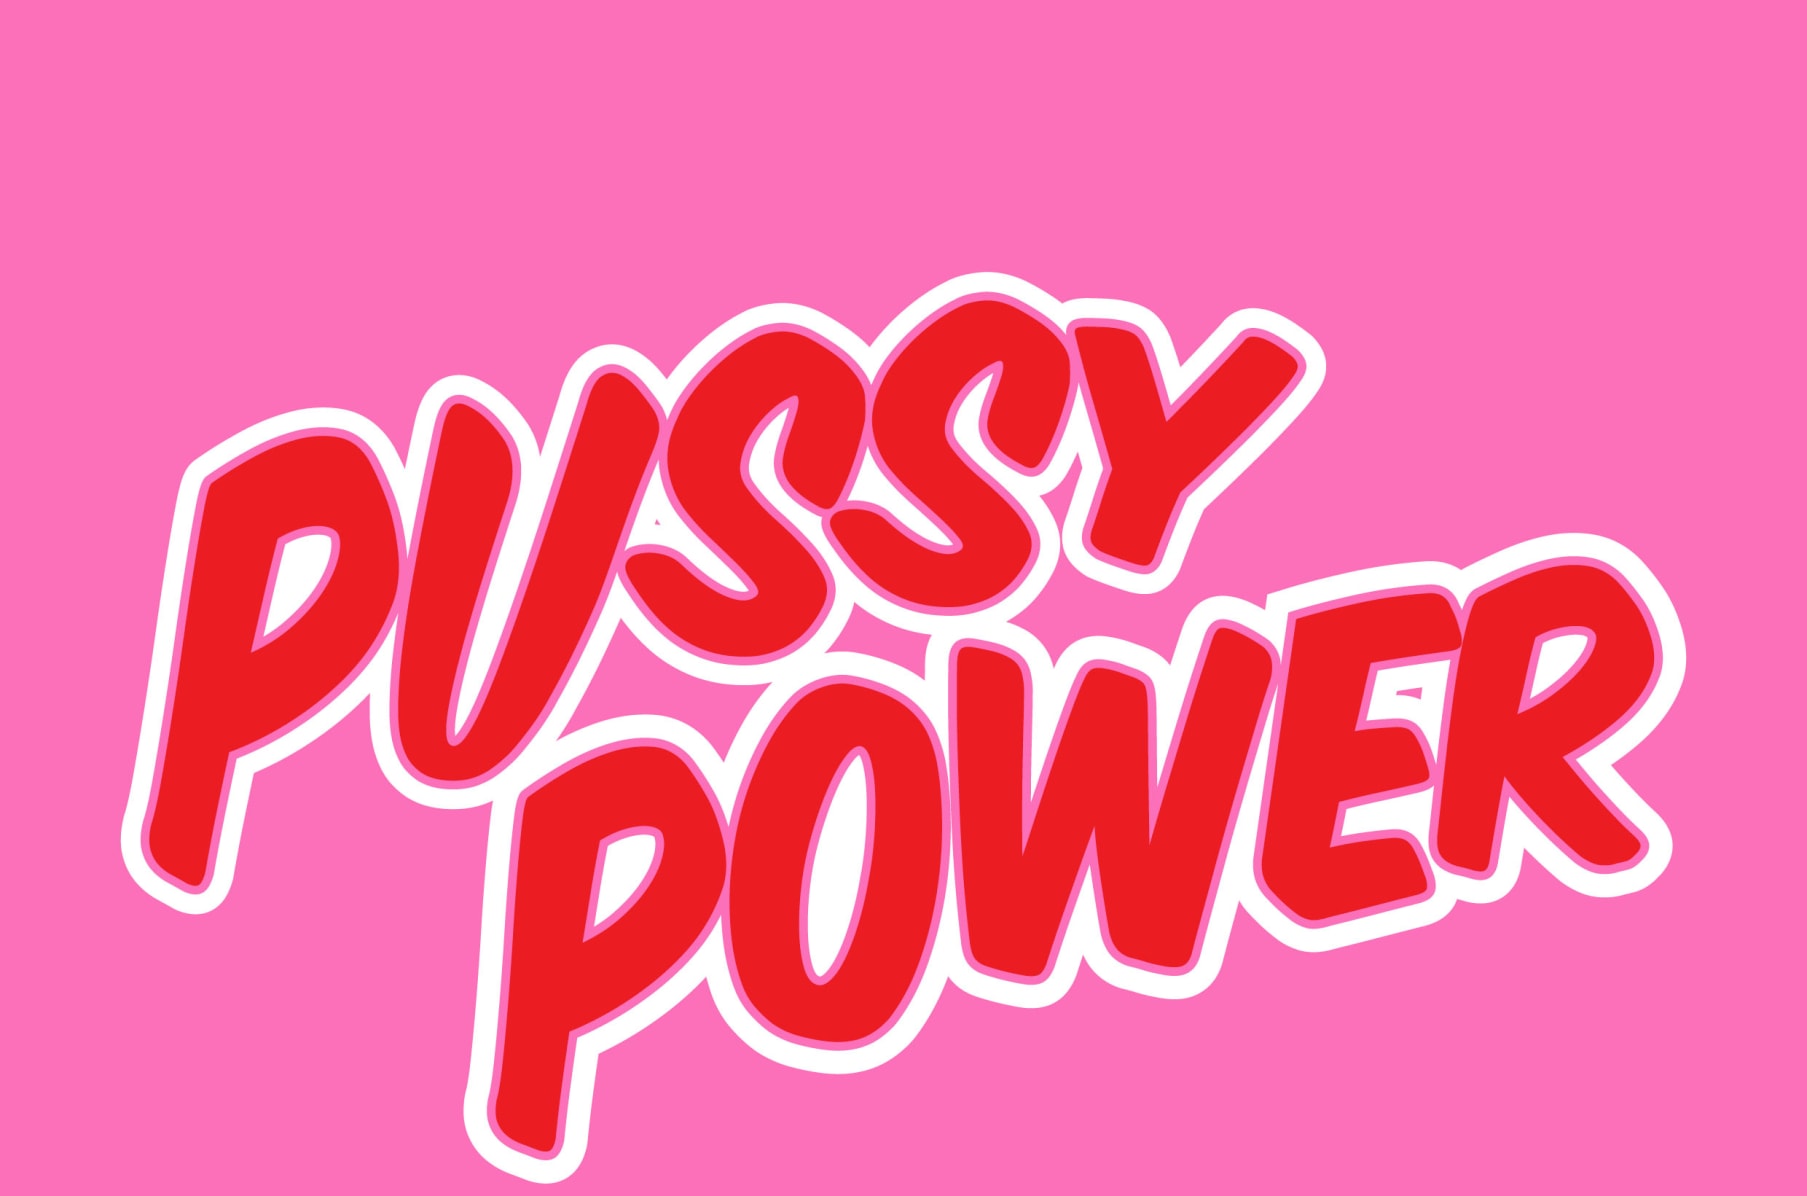 Pussy Fear the